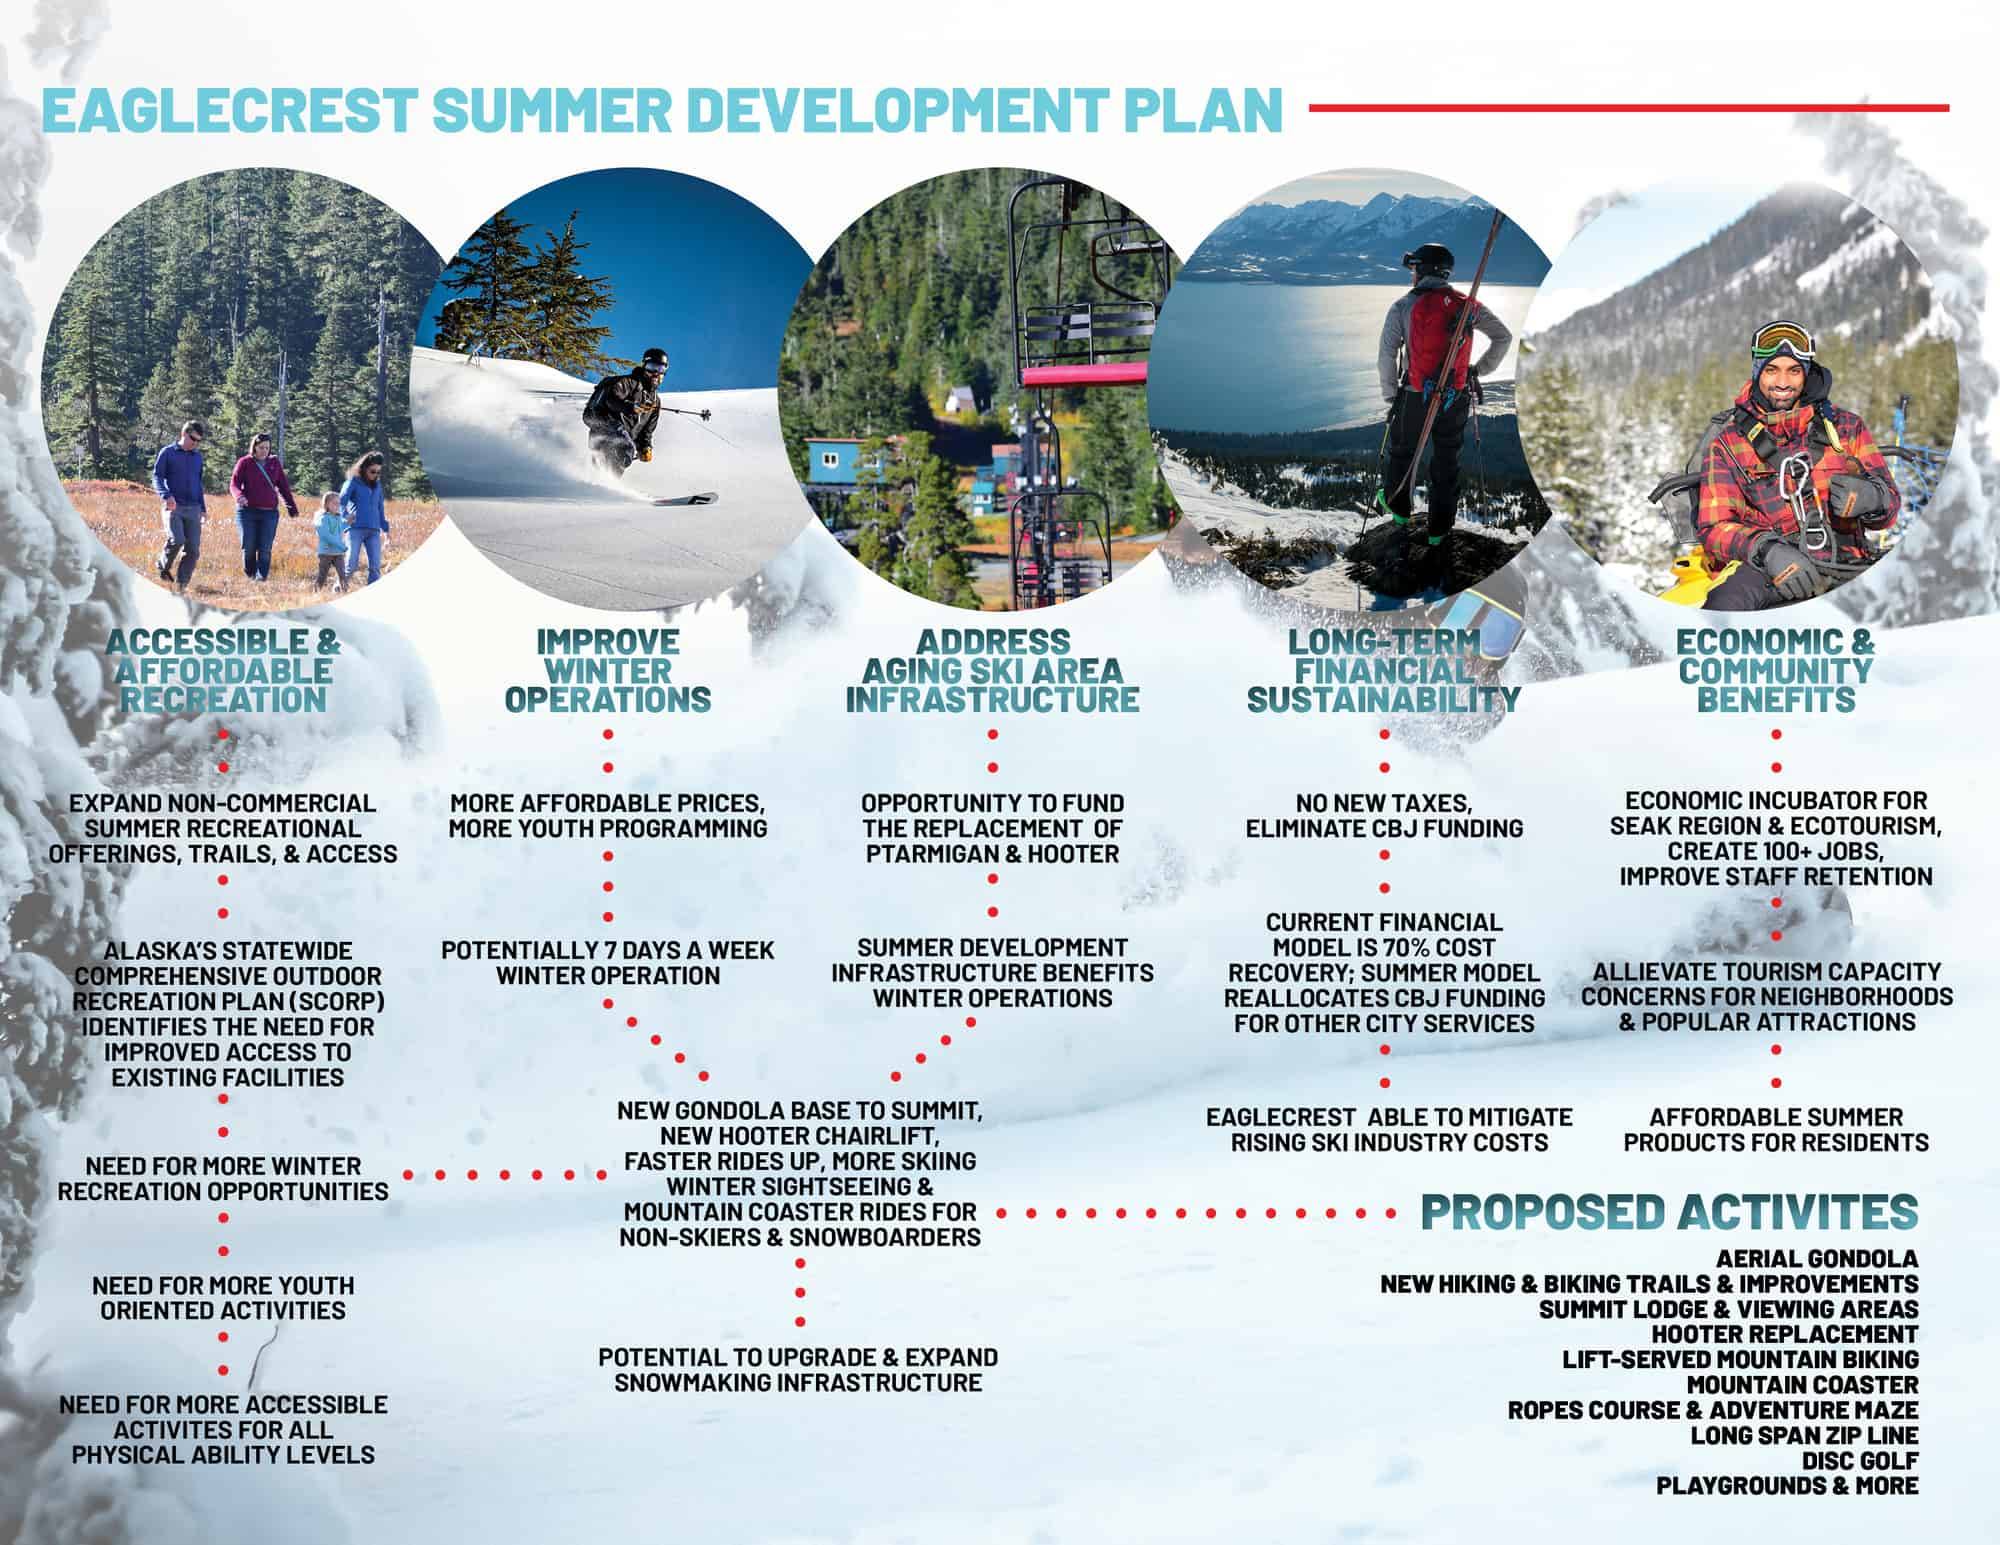 A graphic depicting various attractions being considered for the Eaglecrest ski area. (Courtesy photo | Eaglecrest Summer Development Plan)